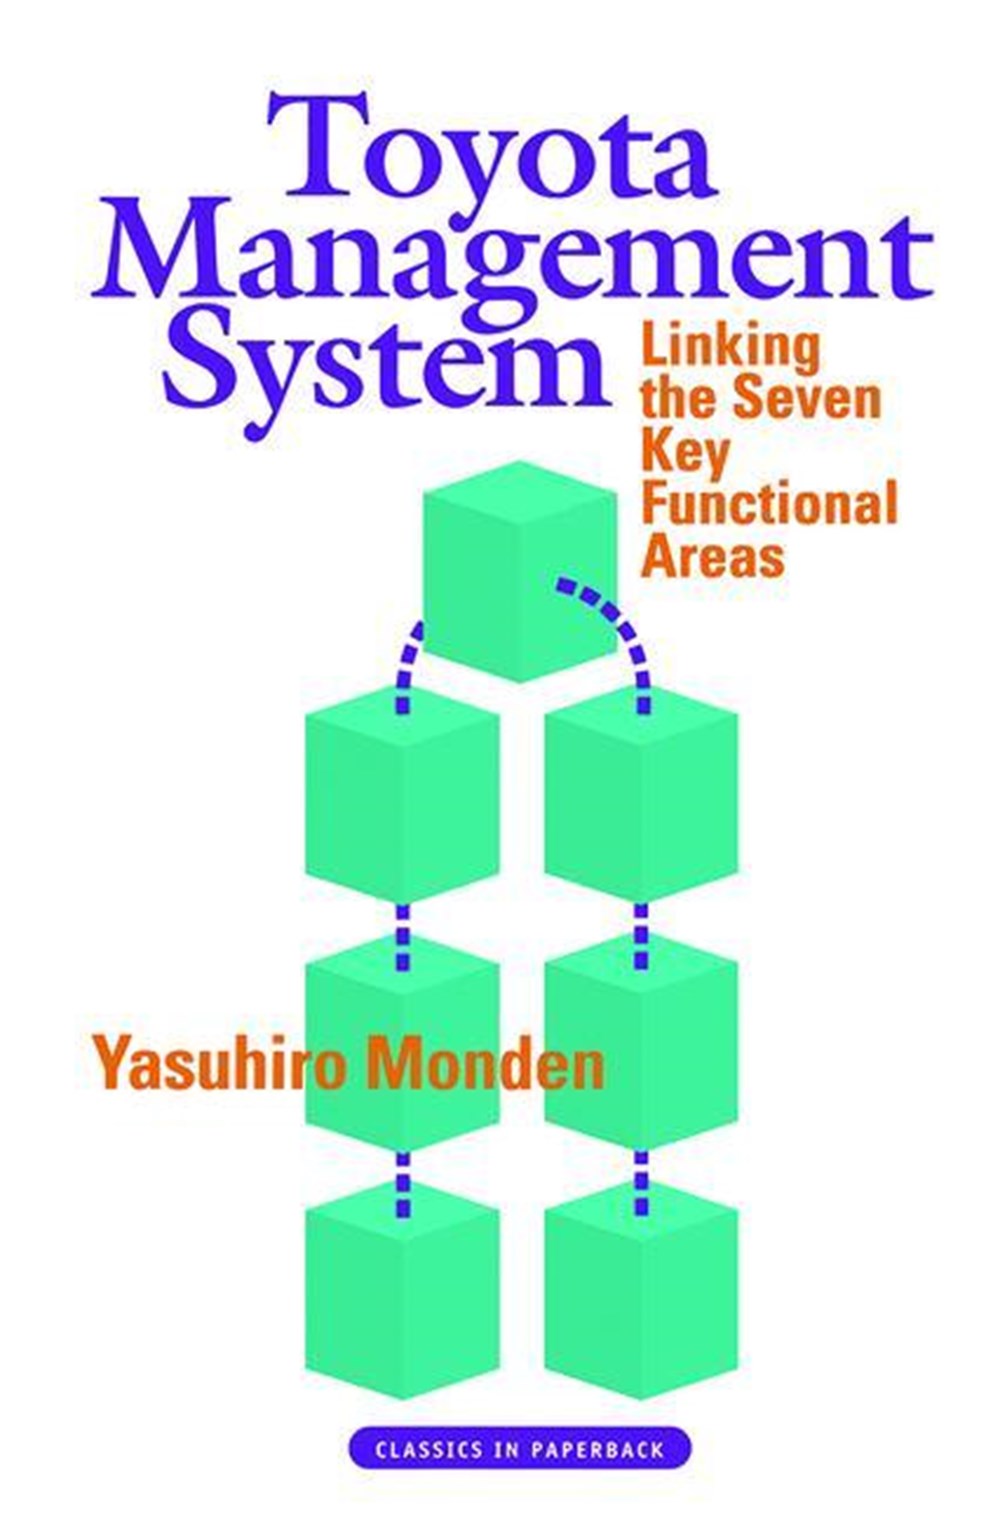 Toyota Management System Linking the Seven Key Functional Areas